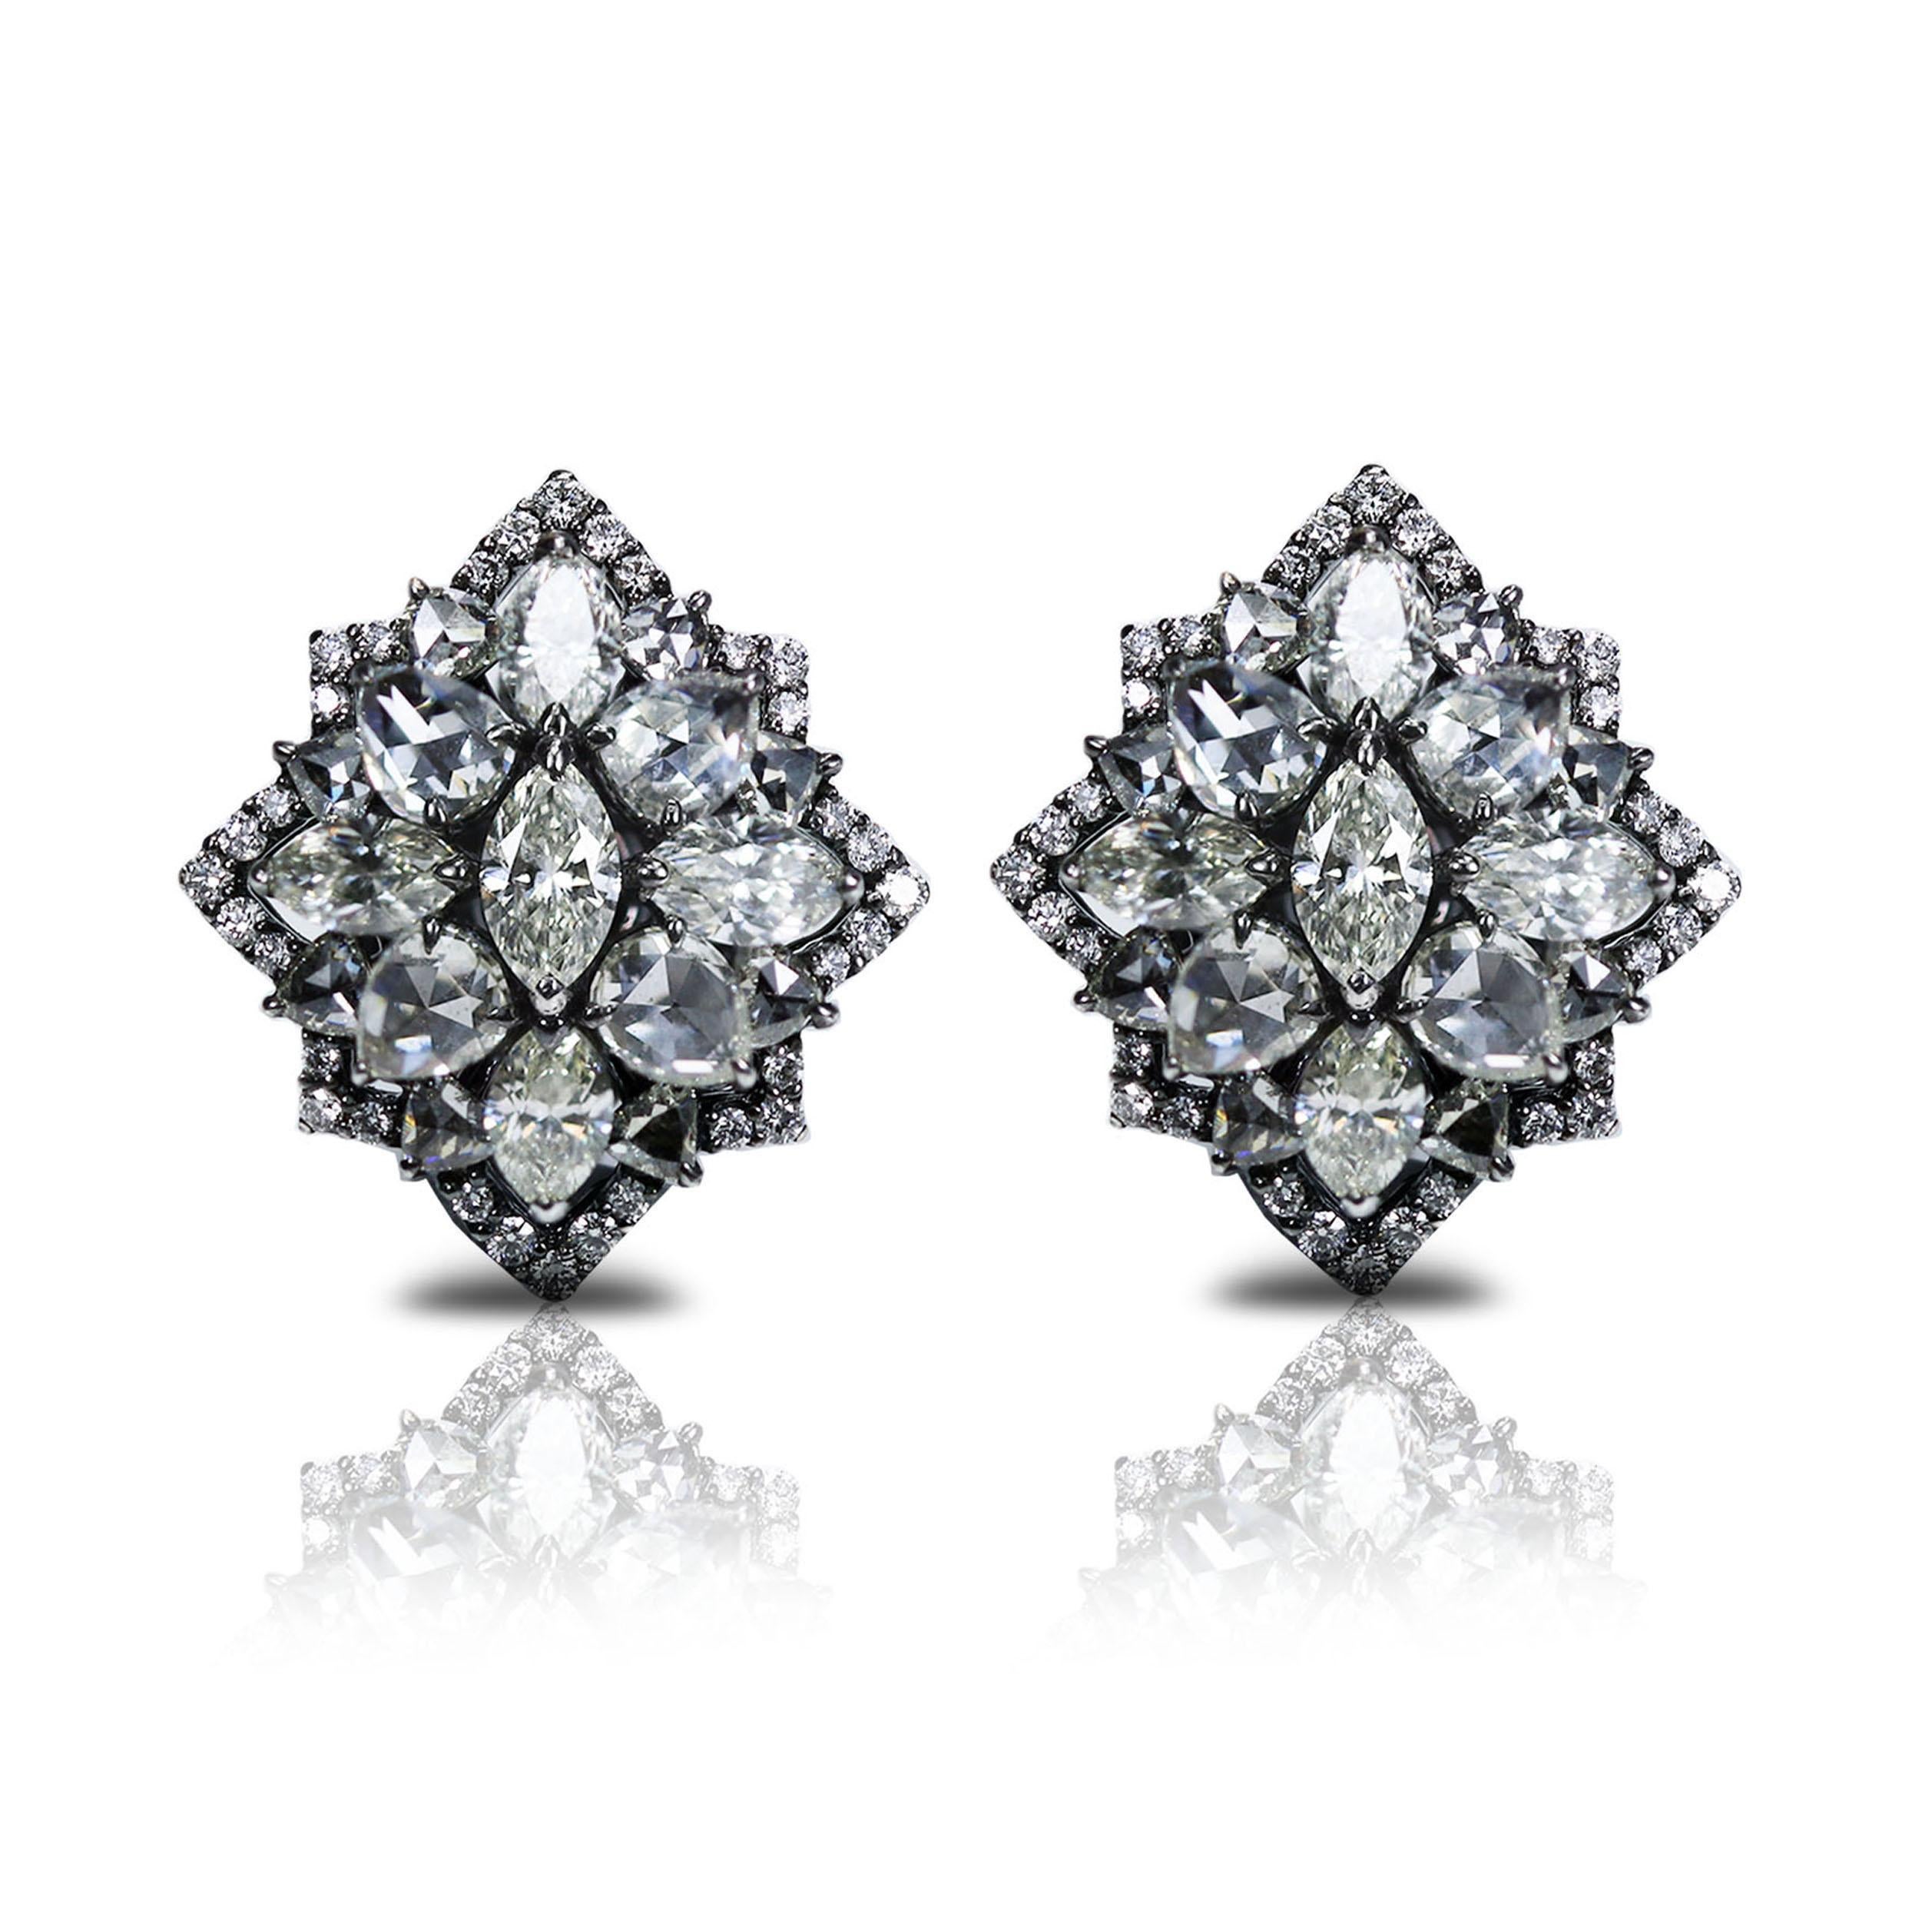 Expounding the virtue of the ‘good things come in small packages’ ideology are these statement diamond tops. Not only do they tap into the reigning trend of oversized stud earrings, they also boasts a desirable geometric pattern. The unique setting